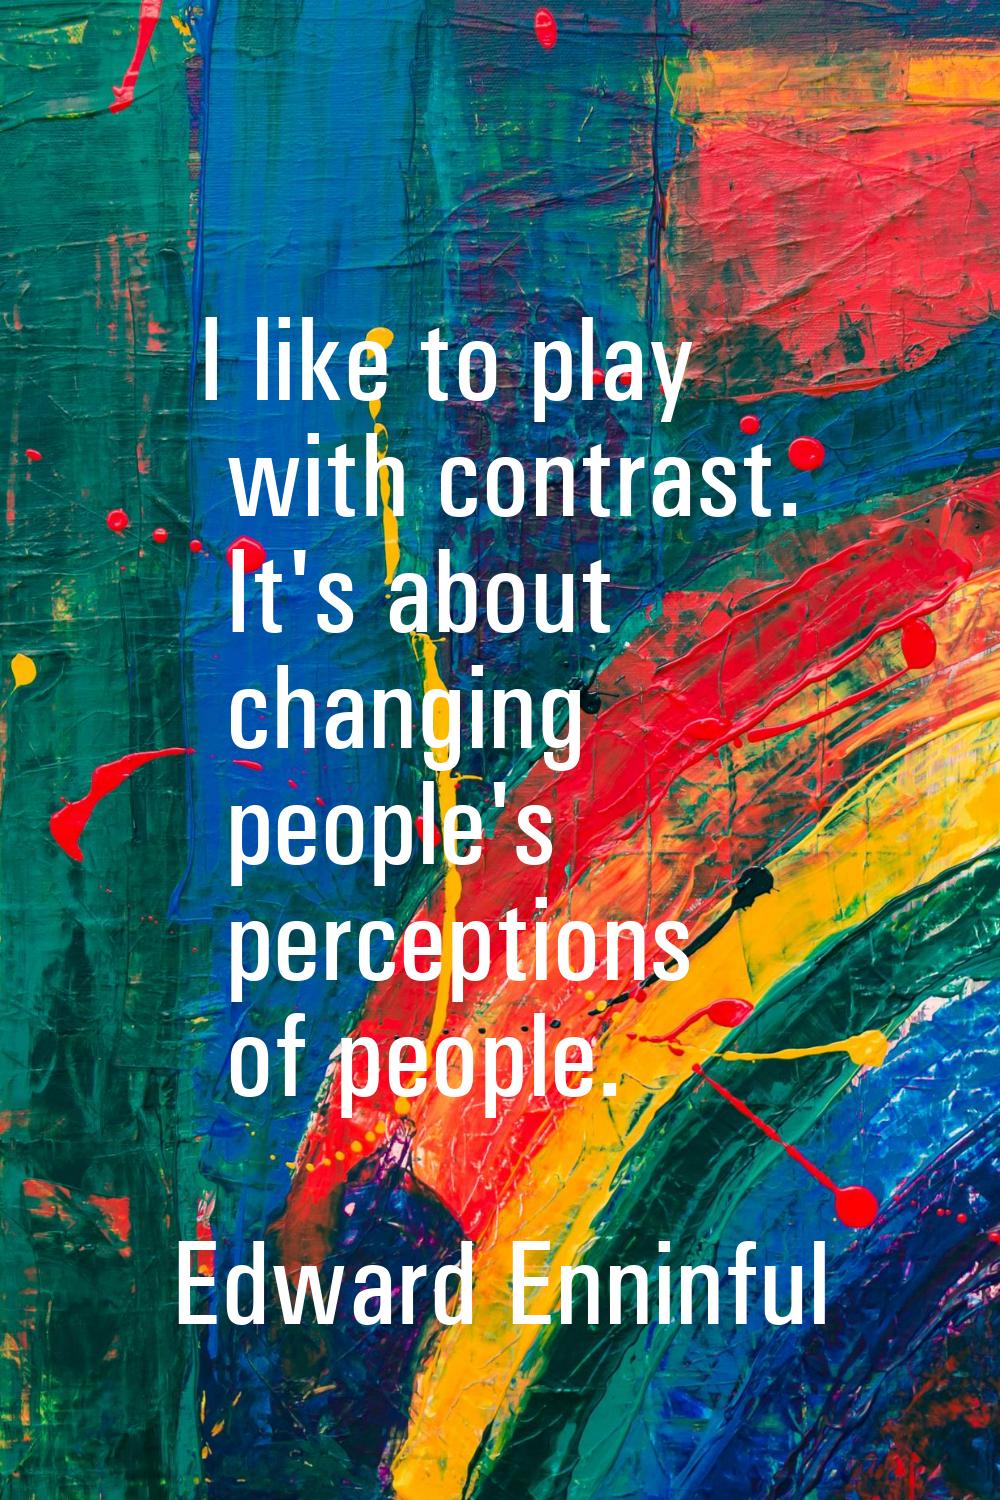 I like to play with contrast. It's about changing people's perceptions of people.